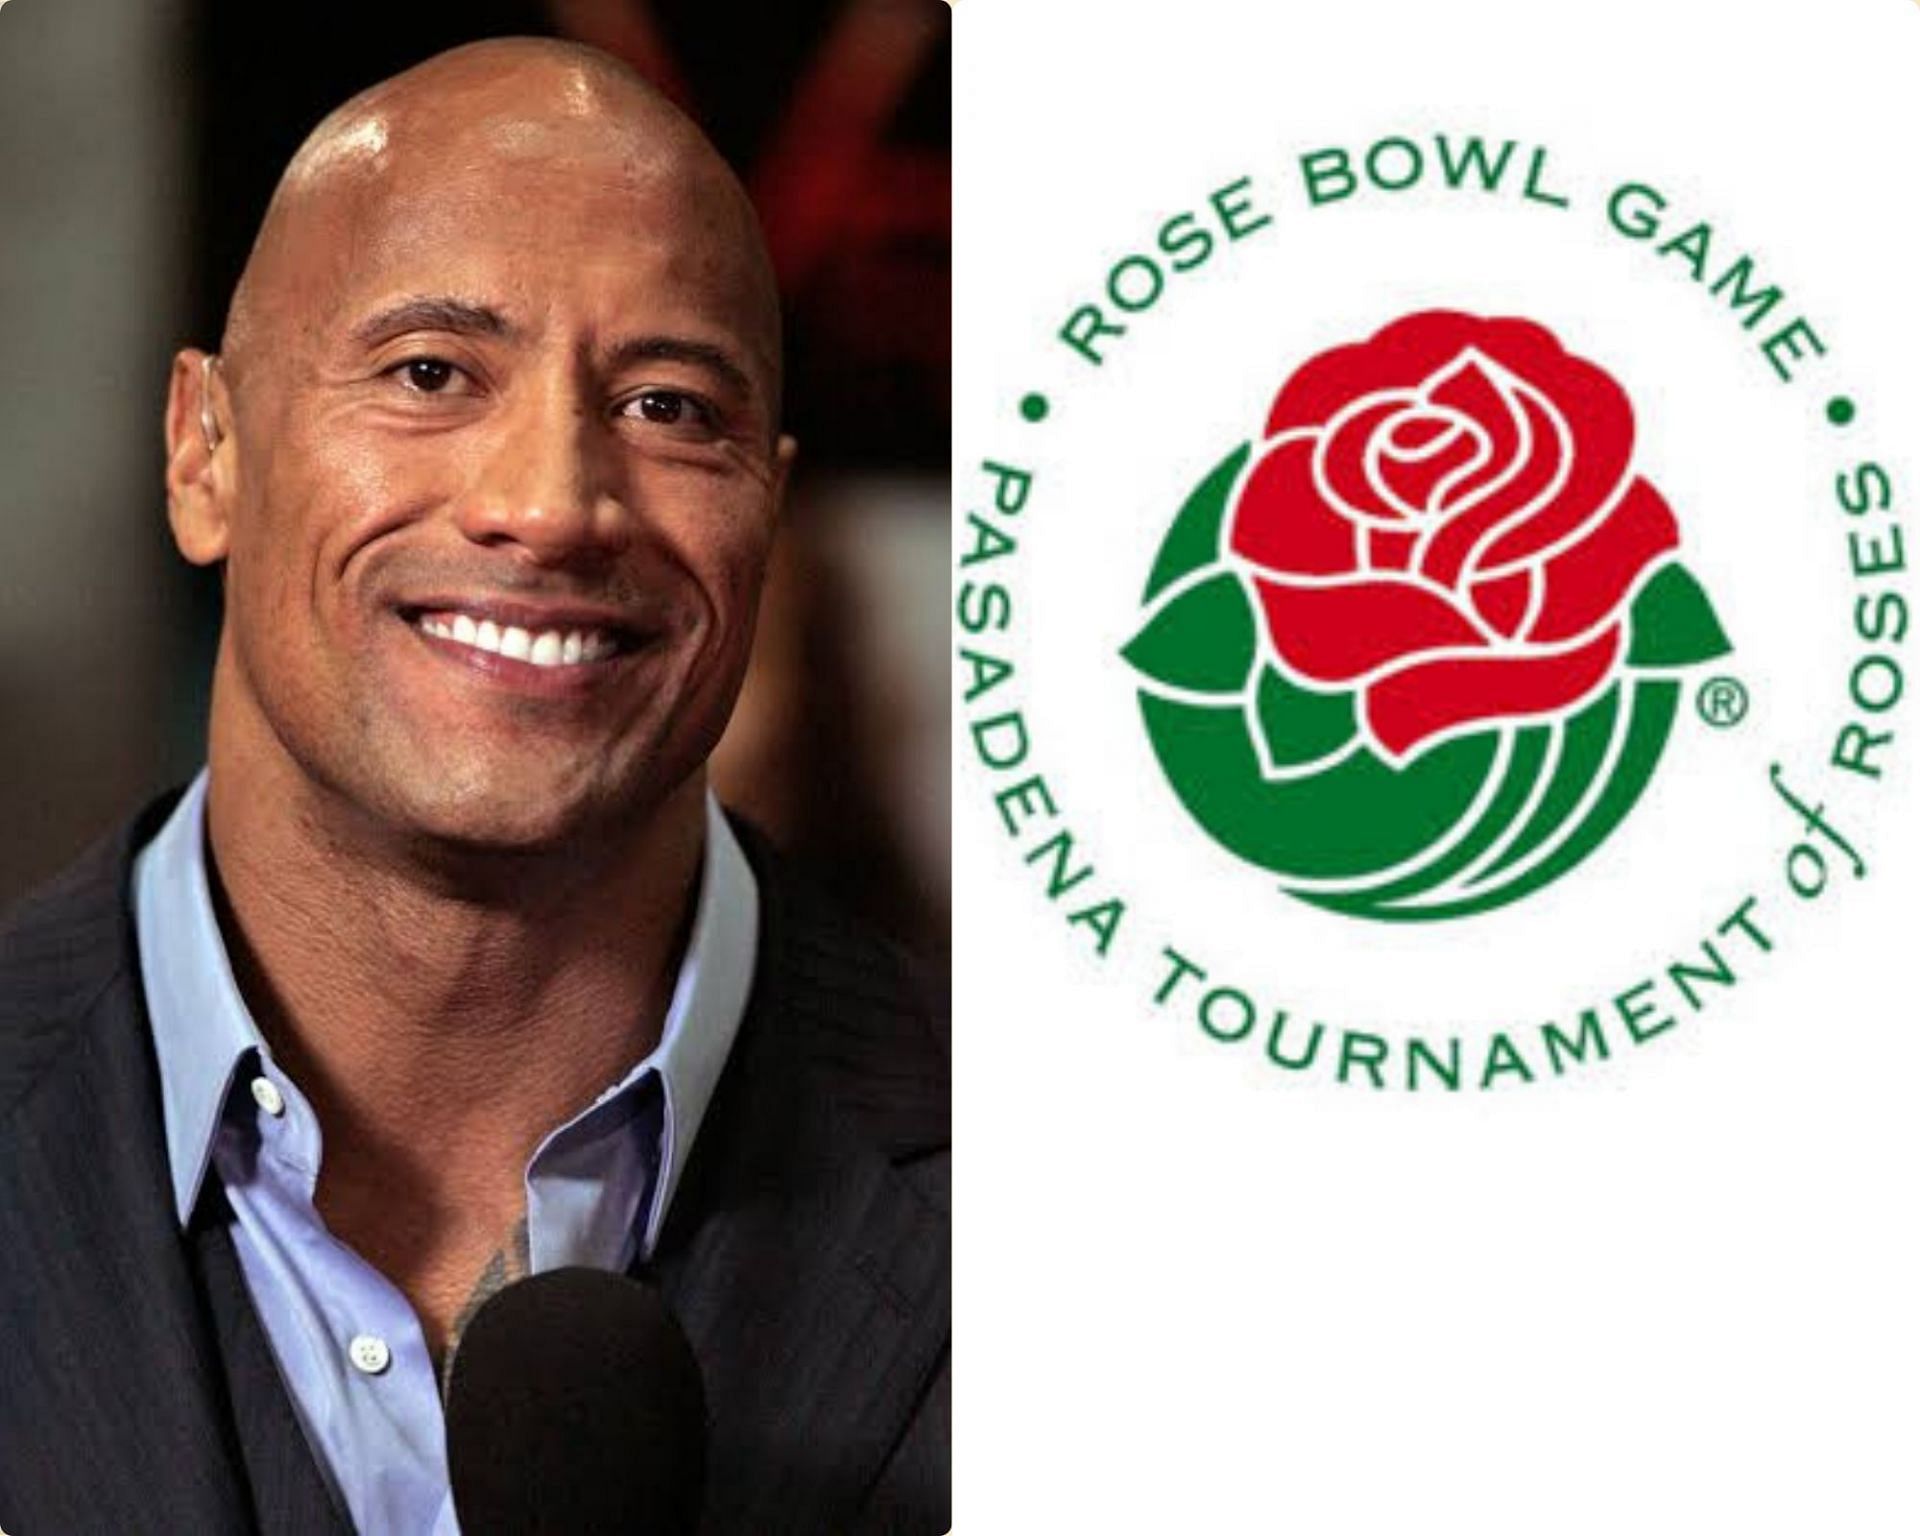 Dwayne &ldquo;The Rock&rdquo; Johnson expected in attendance at the Rose Bowl